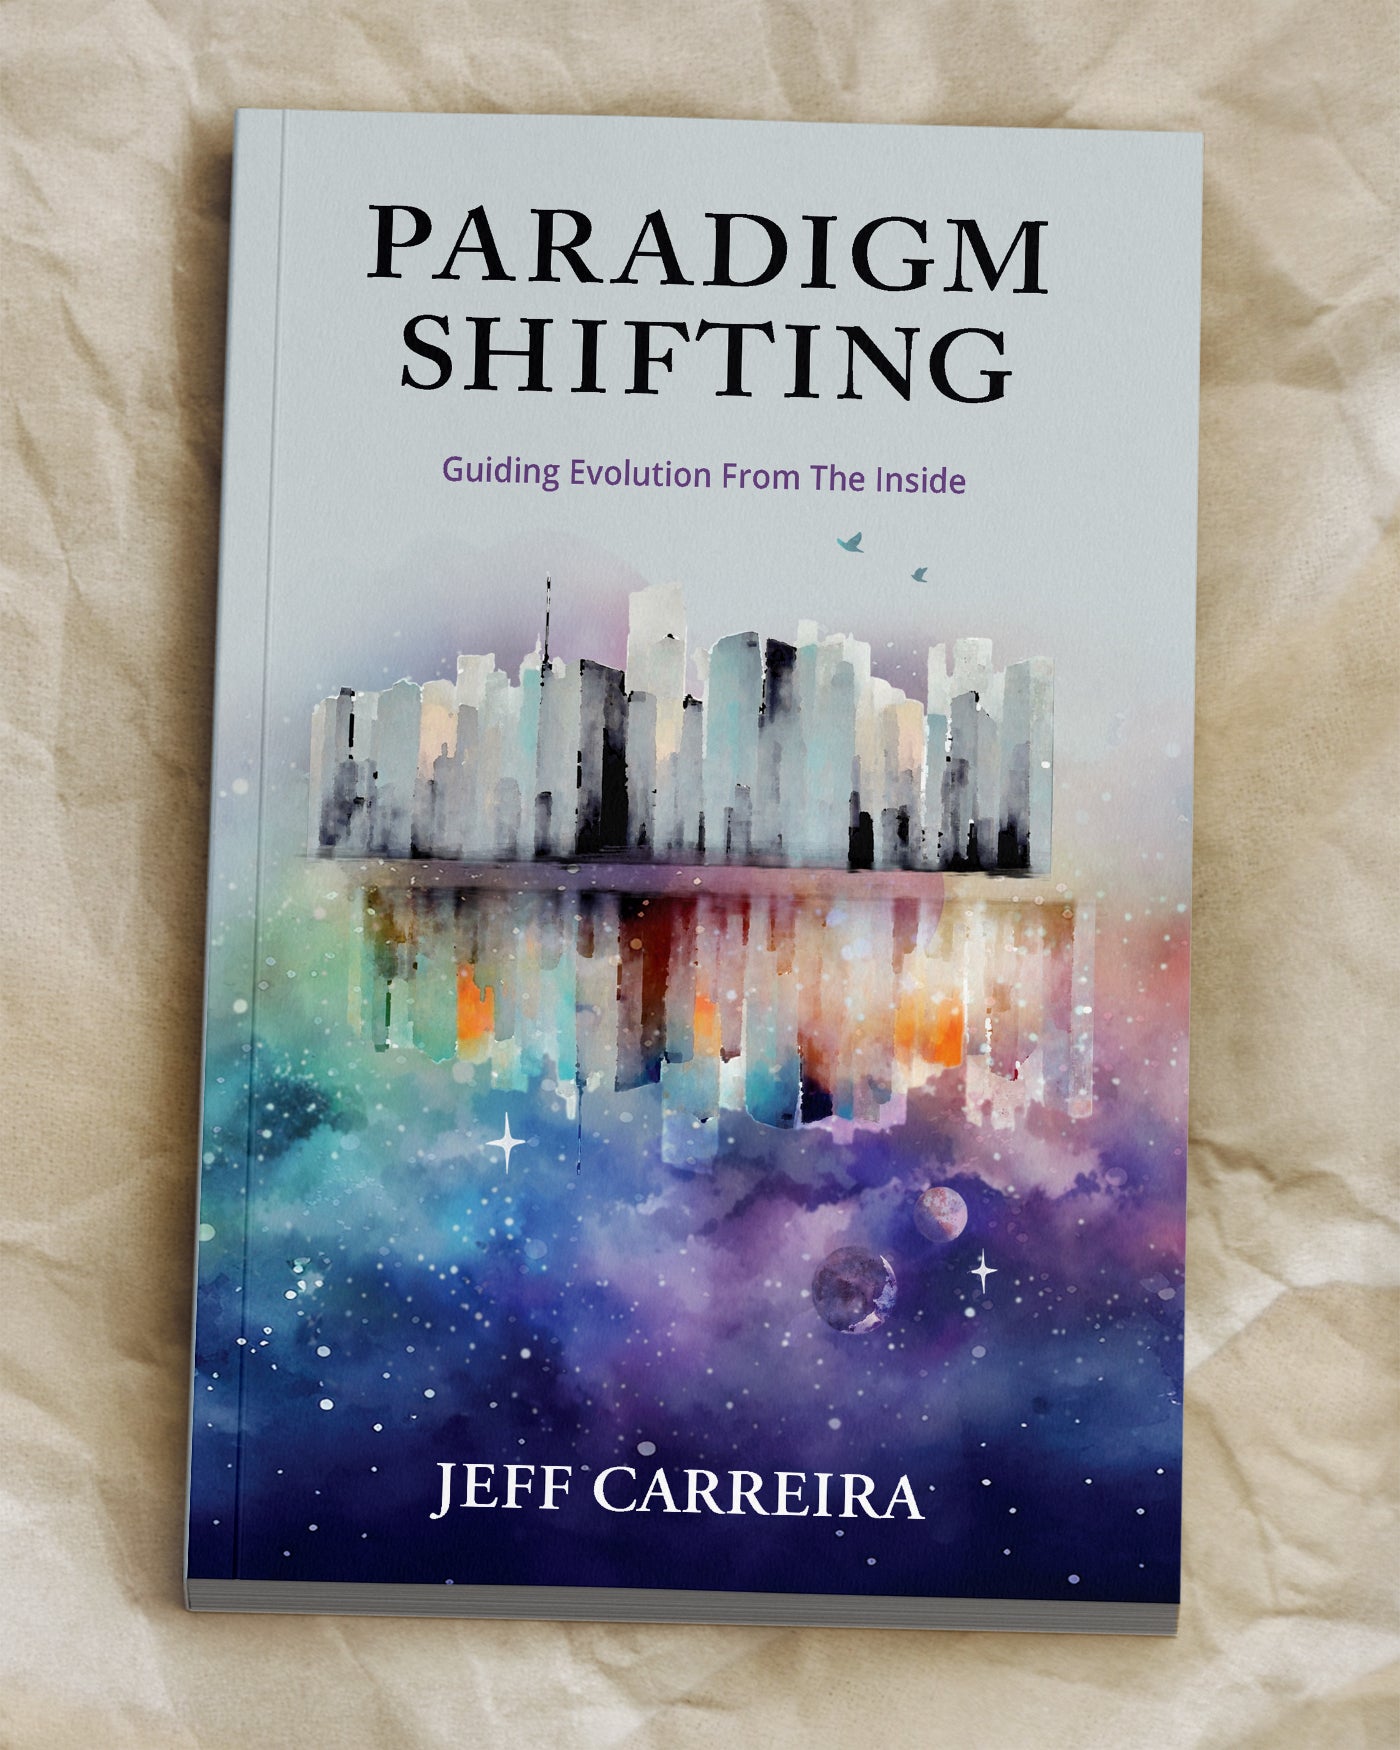 Paradigm Shifting: Guiding Evolution From The Inside